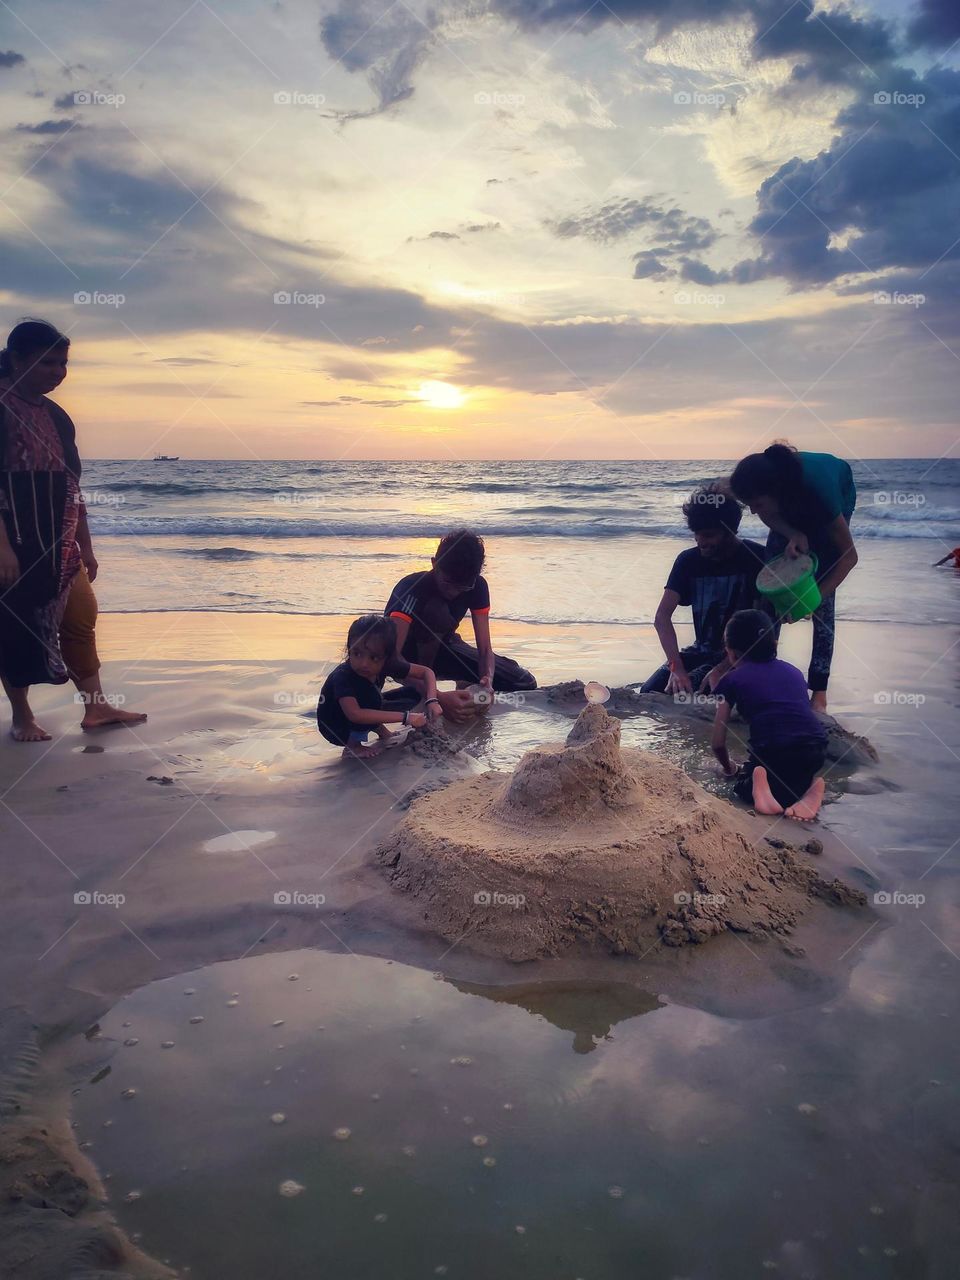 playing in the beach with friends during sunset